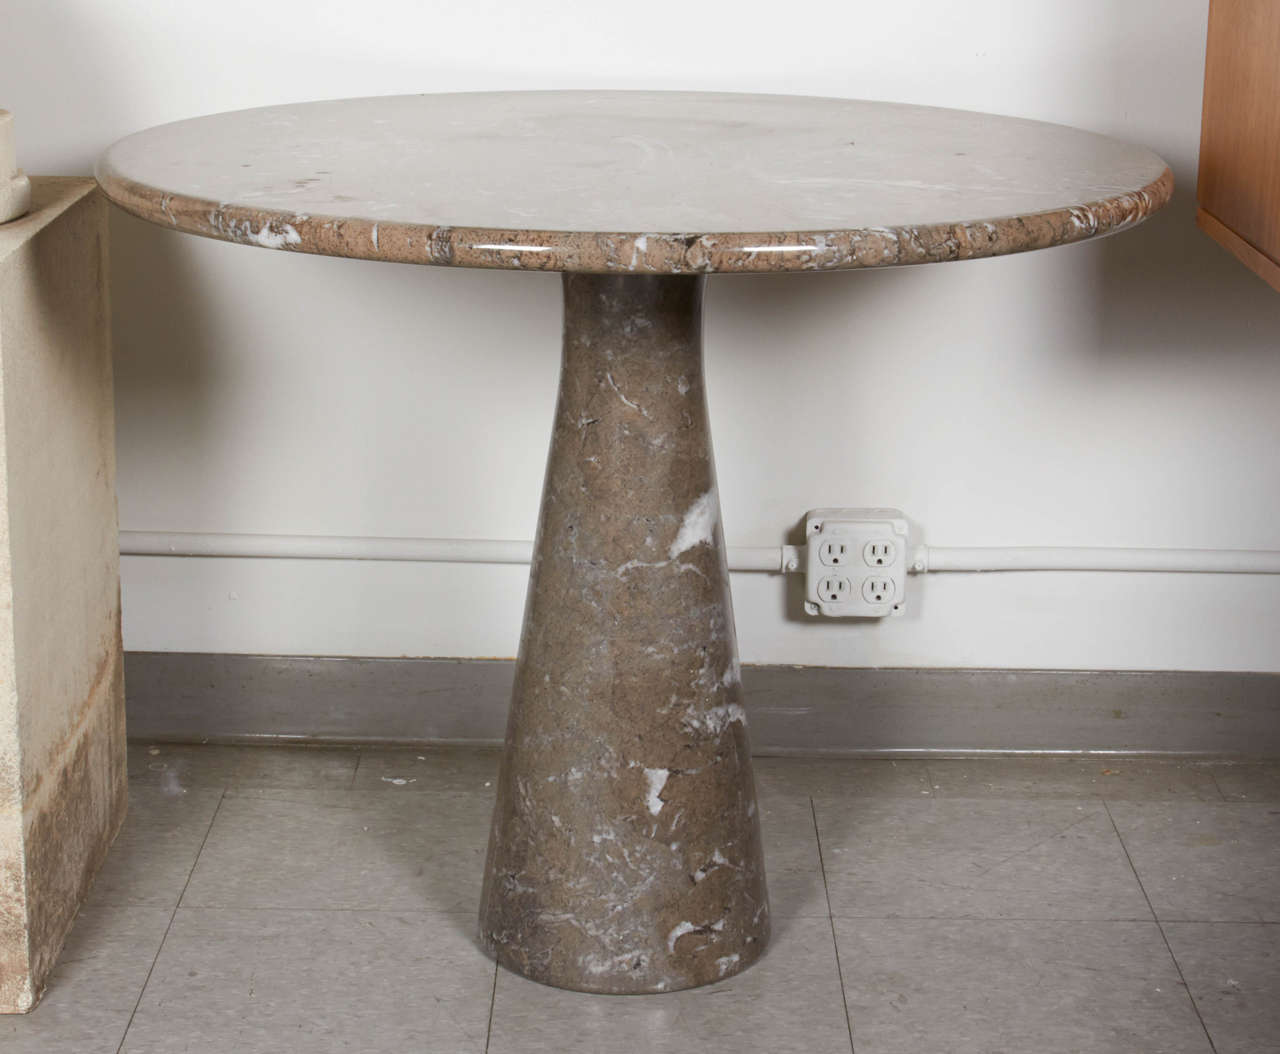 This table is one of Mangiarotti's classic designs, the M1 manufactured by Tisettanta in 1968.  It has wonderful graining and is in excellent condition.